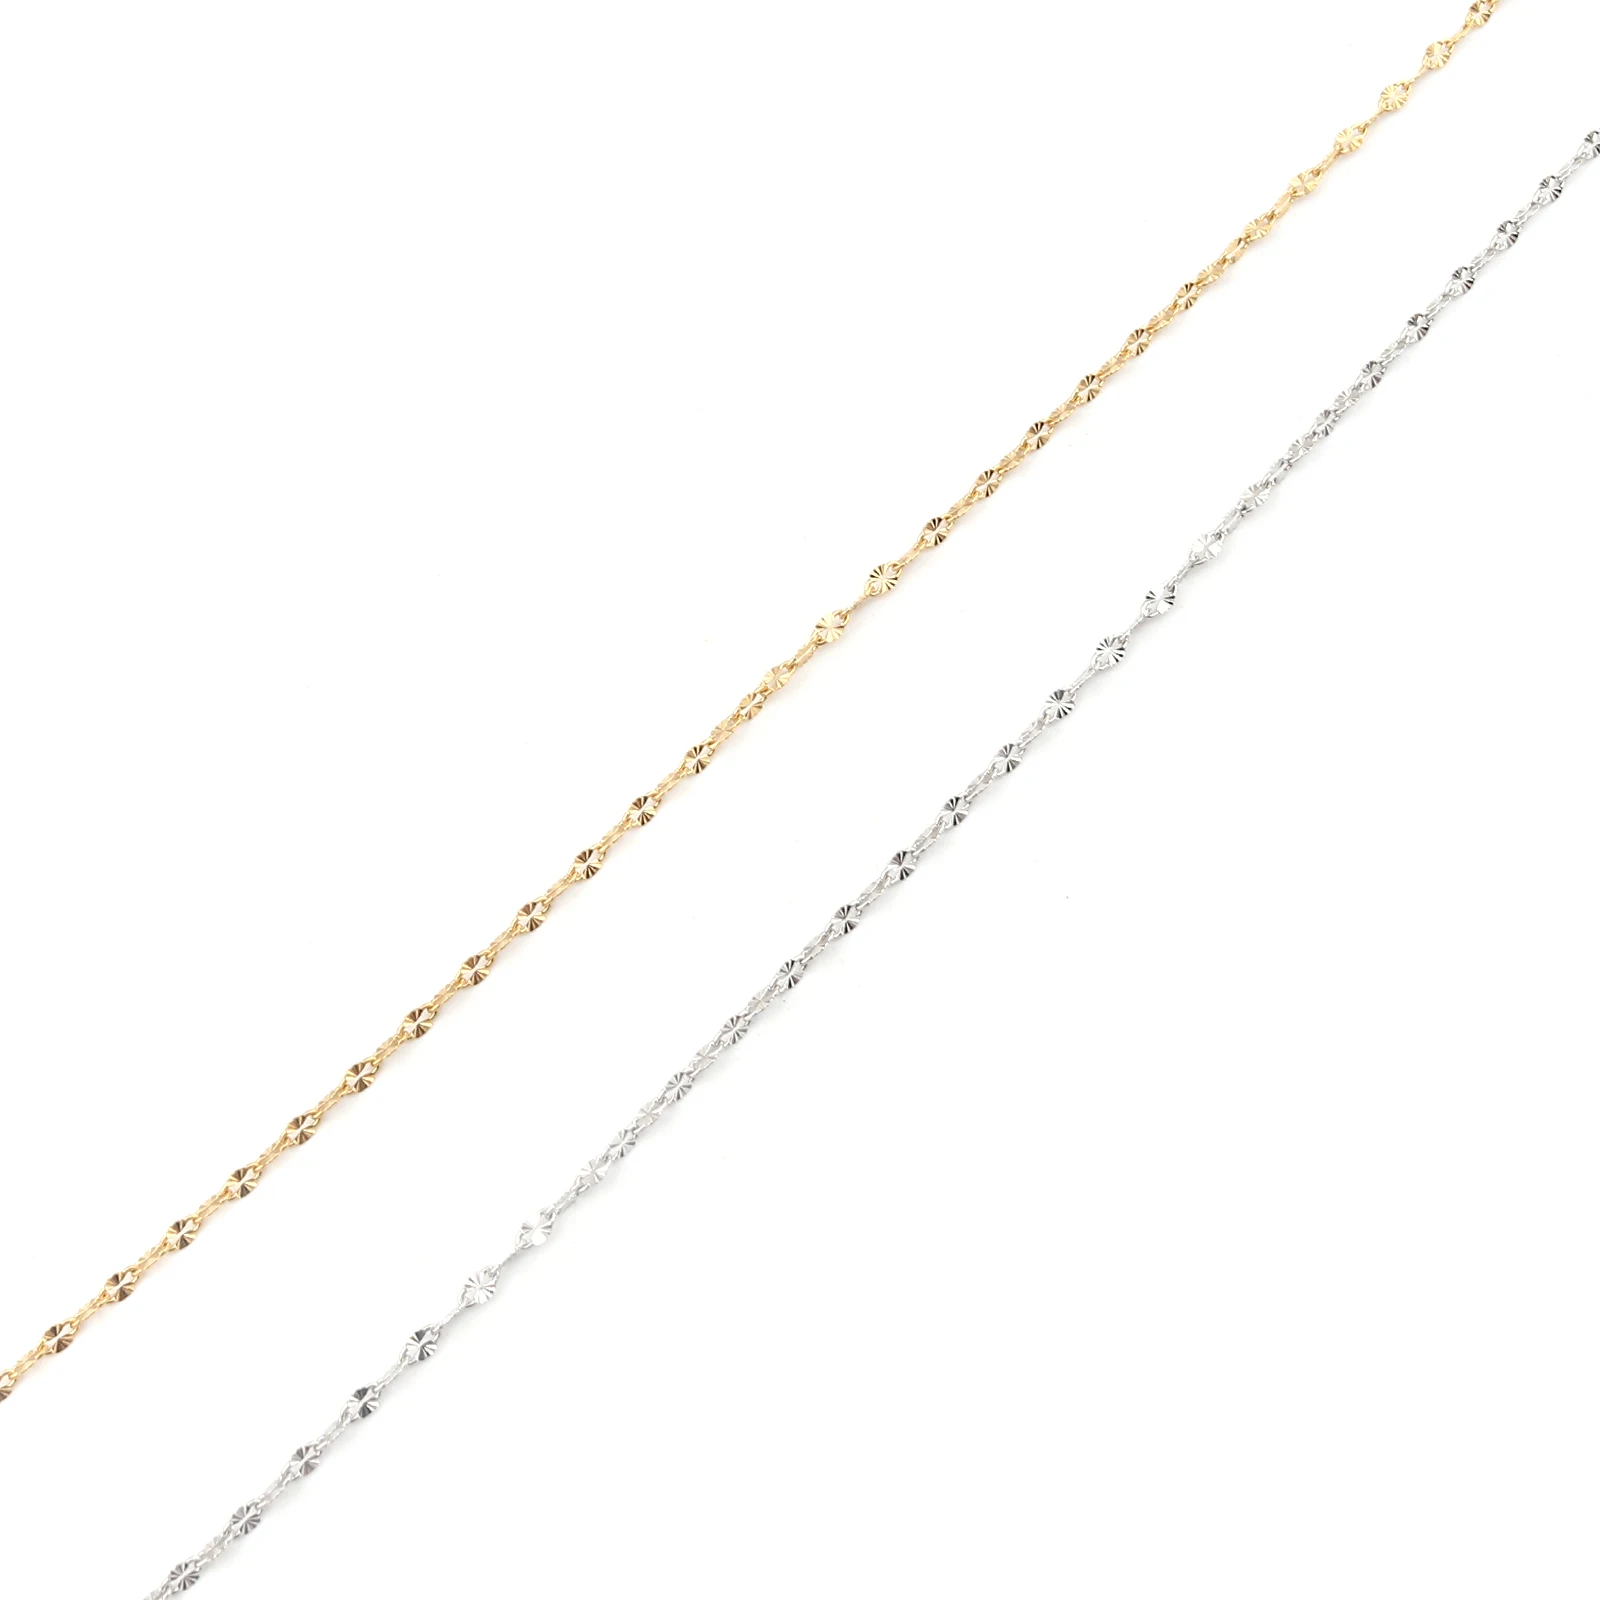 1 PC Hot 304 Stainless Steel Necklace For Necklace Making Oval Silver Color Gold Color Link Chain Jewelry DIY Wholesale 50cm